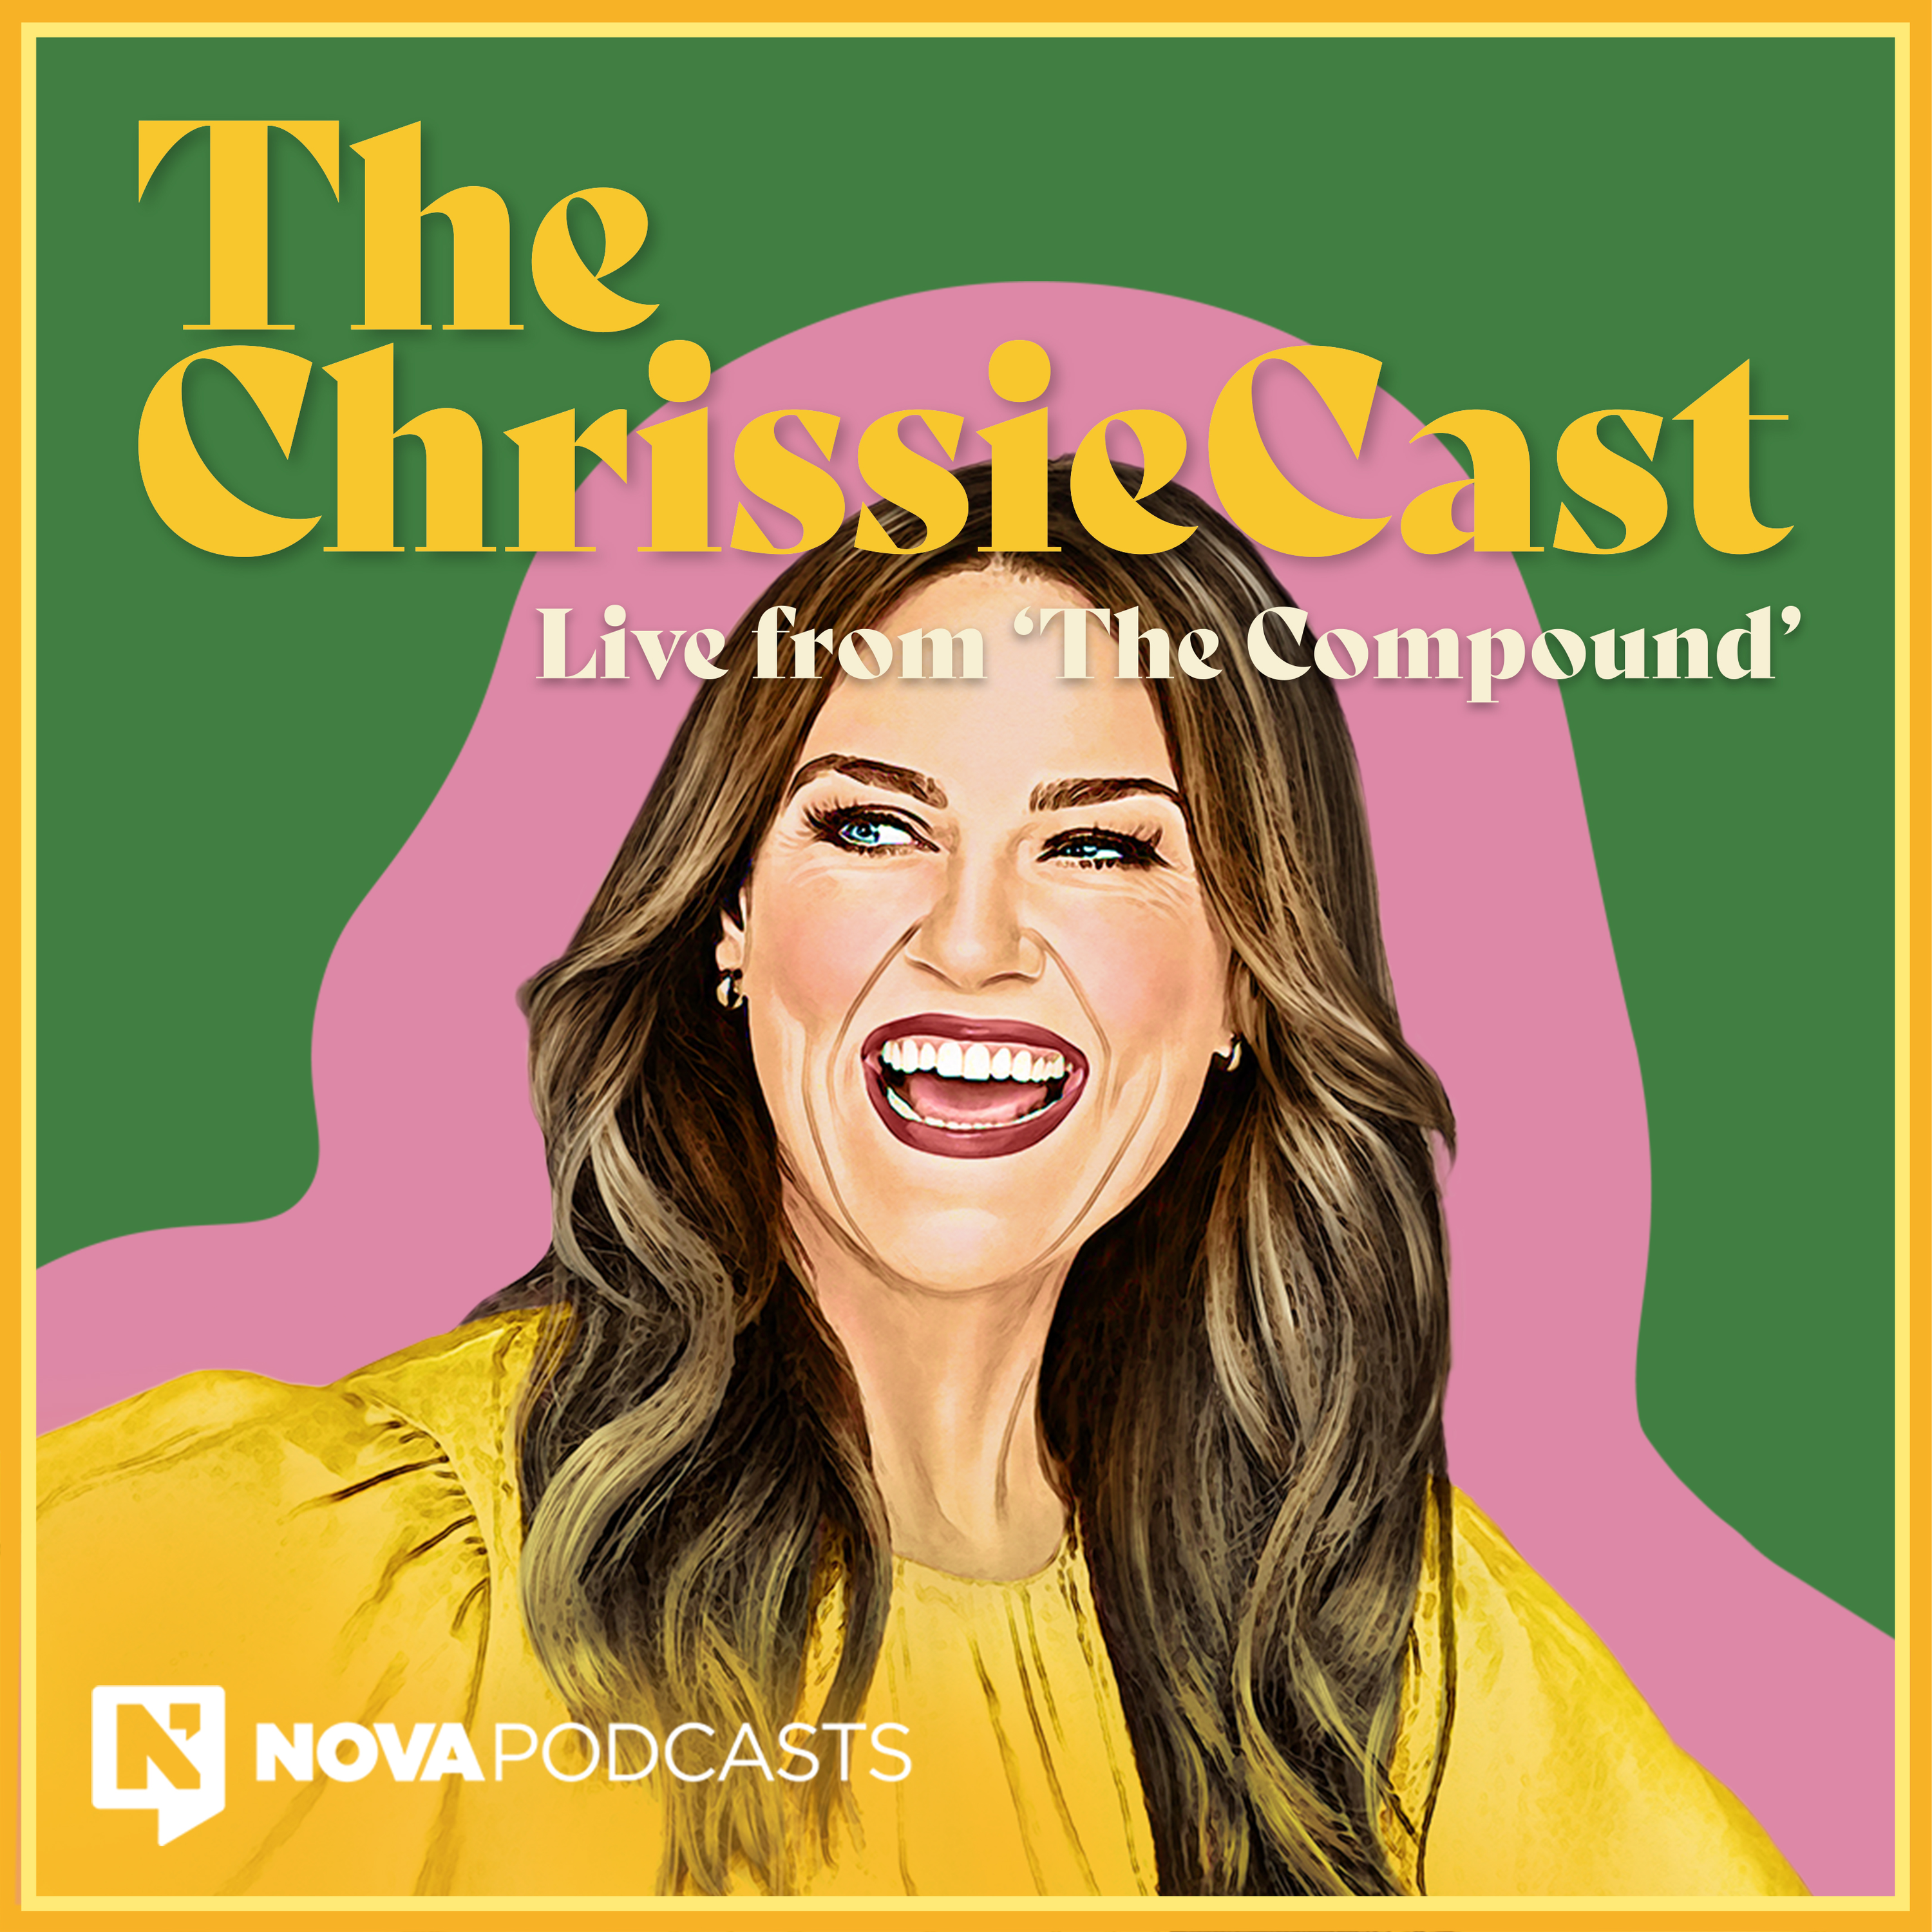 The ChrissieCast: Ash Williams Talks Love Interests, Self-Exploration And What To Do When You Hate Your Job